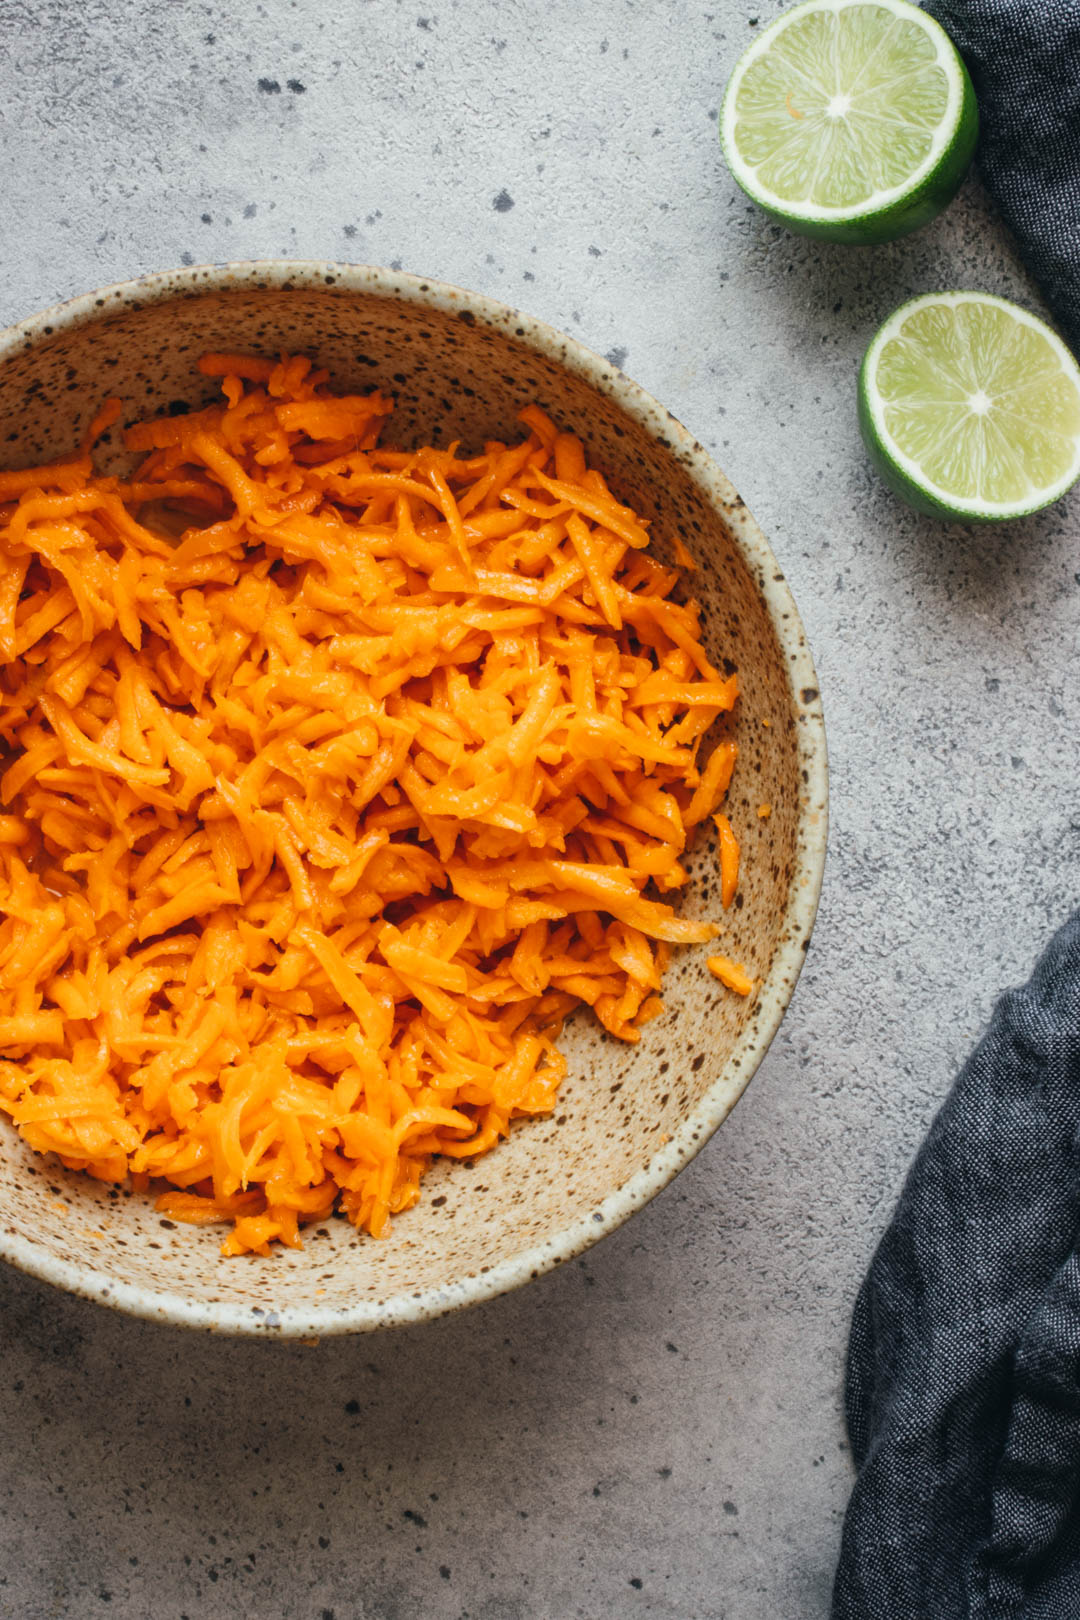 shredded carrot salad in a serving bowl with limes and a napkin on the side